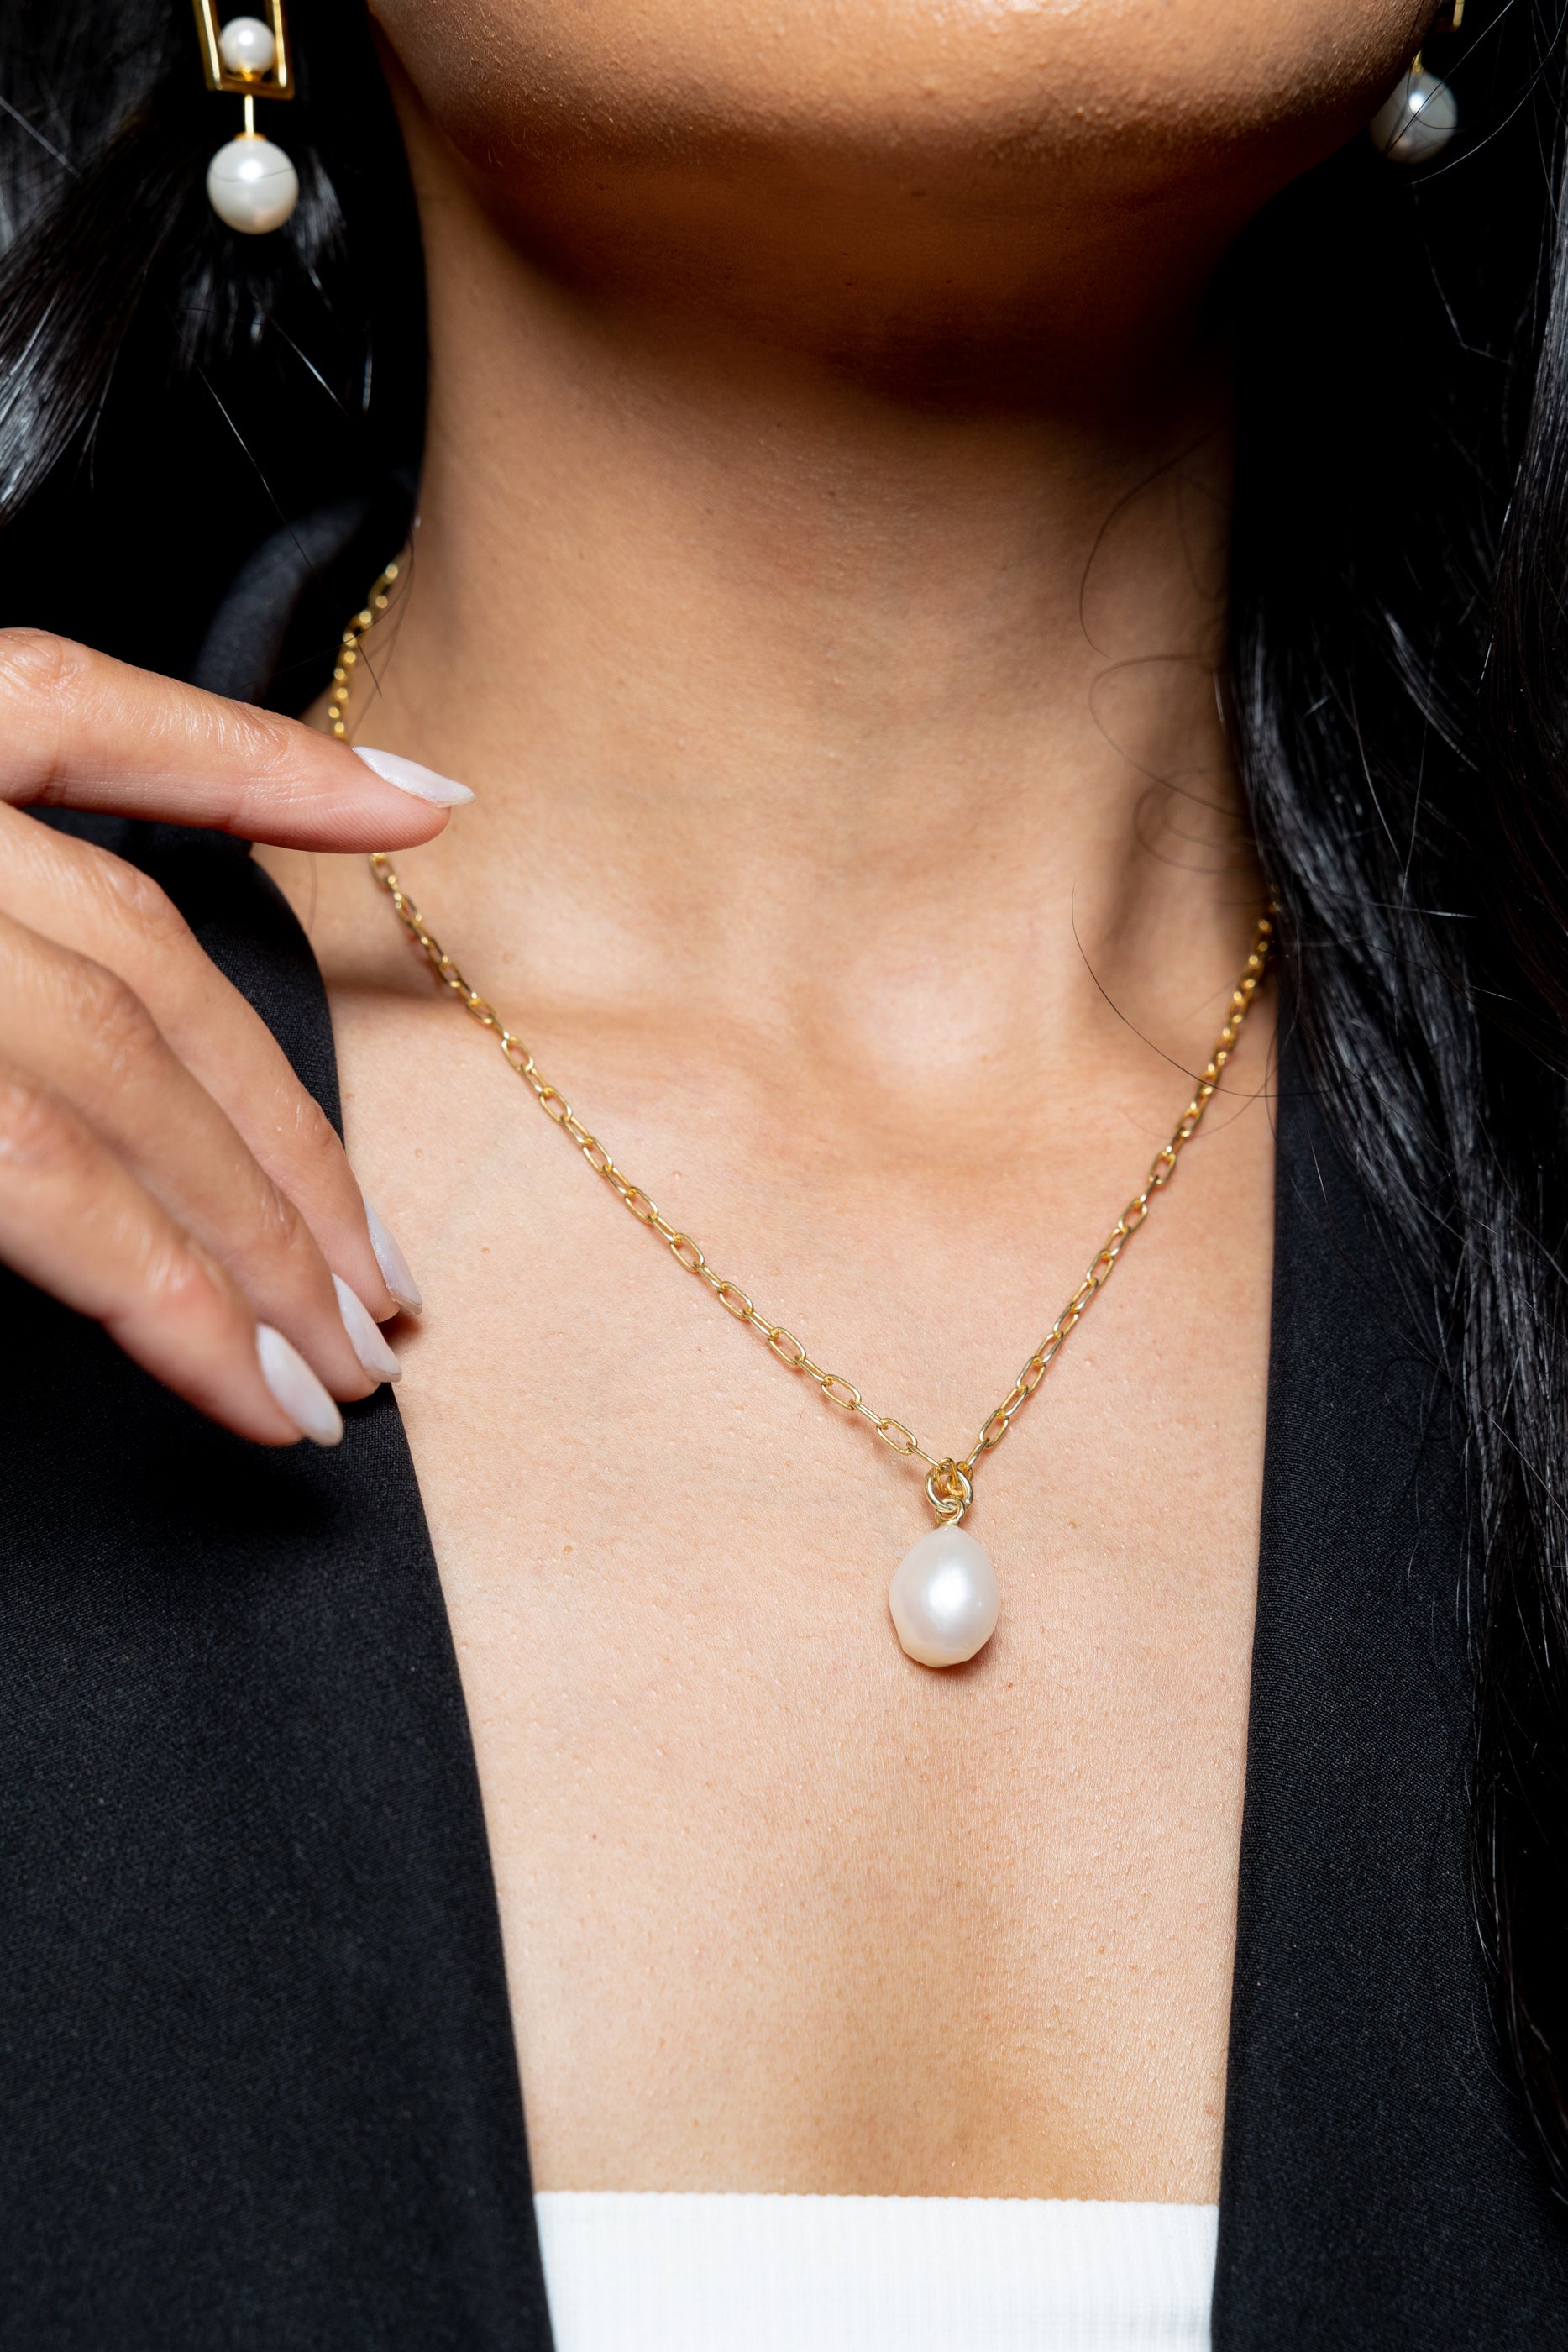 Baroque Pearl Teardrop Paperclip Necklace/18k Yellow Gold with Baroque Pearl - InfinityXInfinity